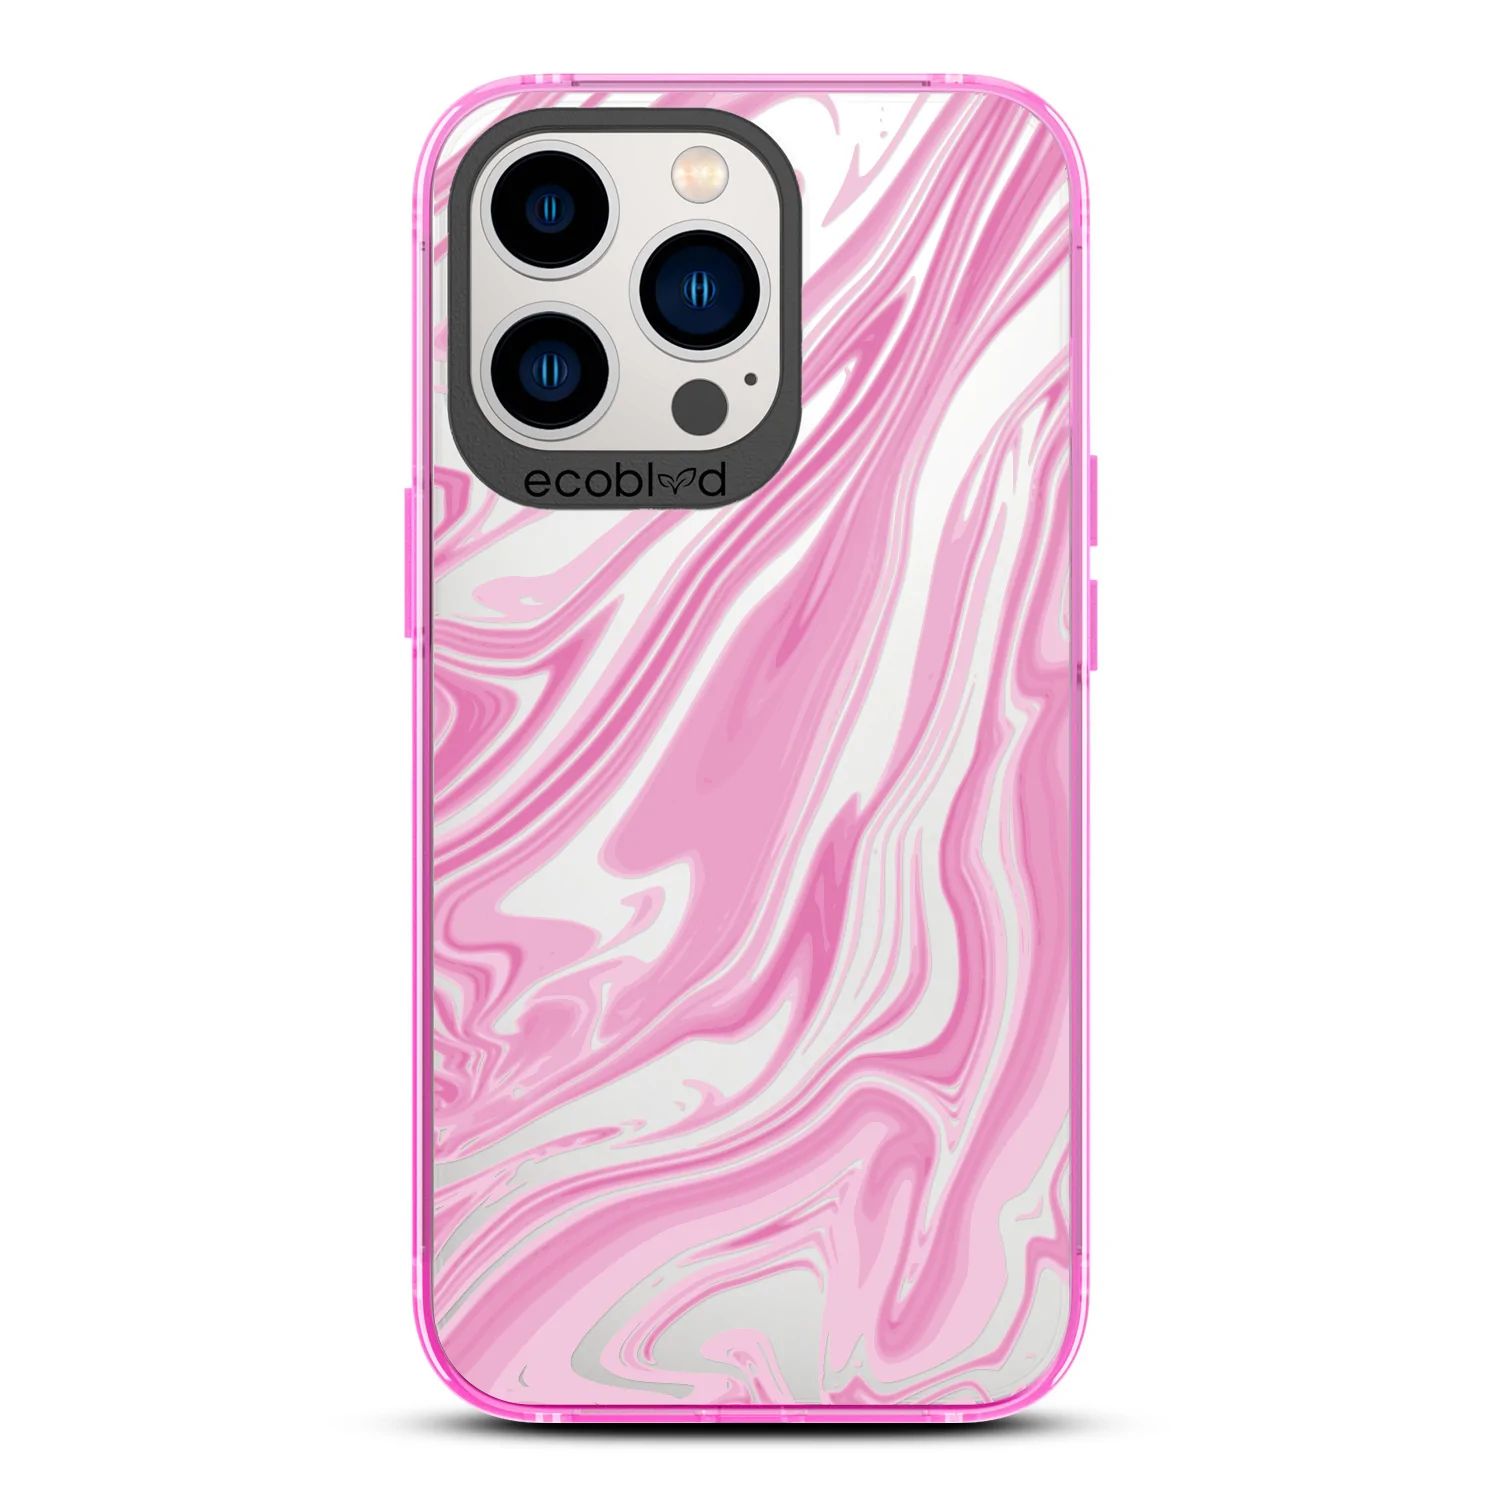 Simply Marbleous - iPhone 12 & 13 Pro Max Clear Case | EcoBlvd | EcoBlvd